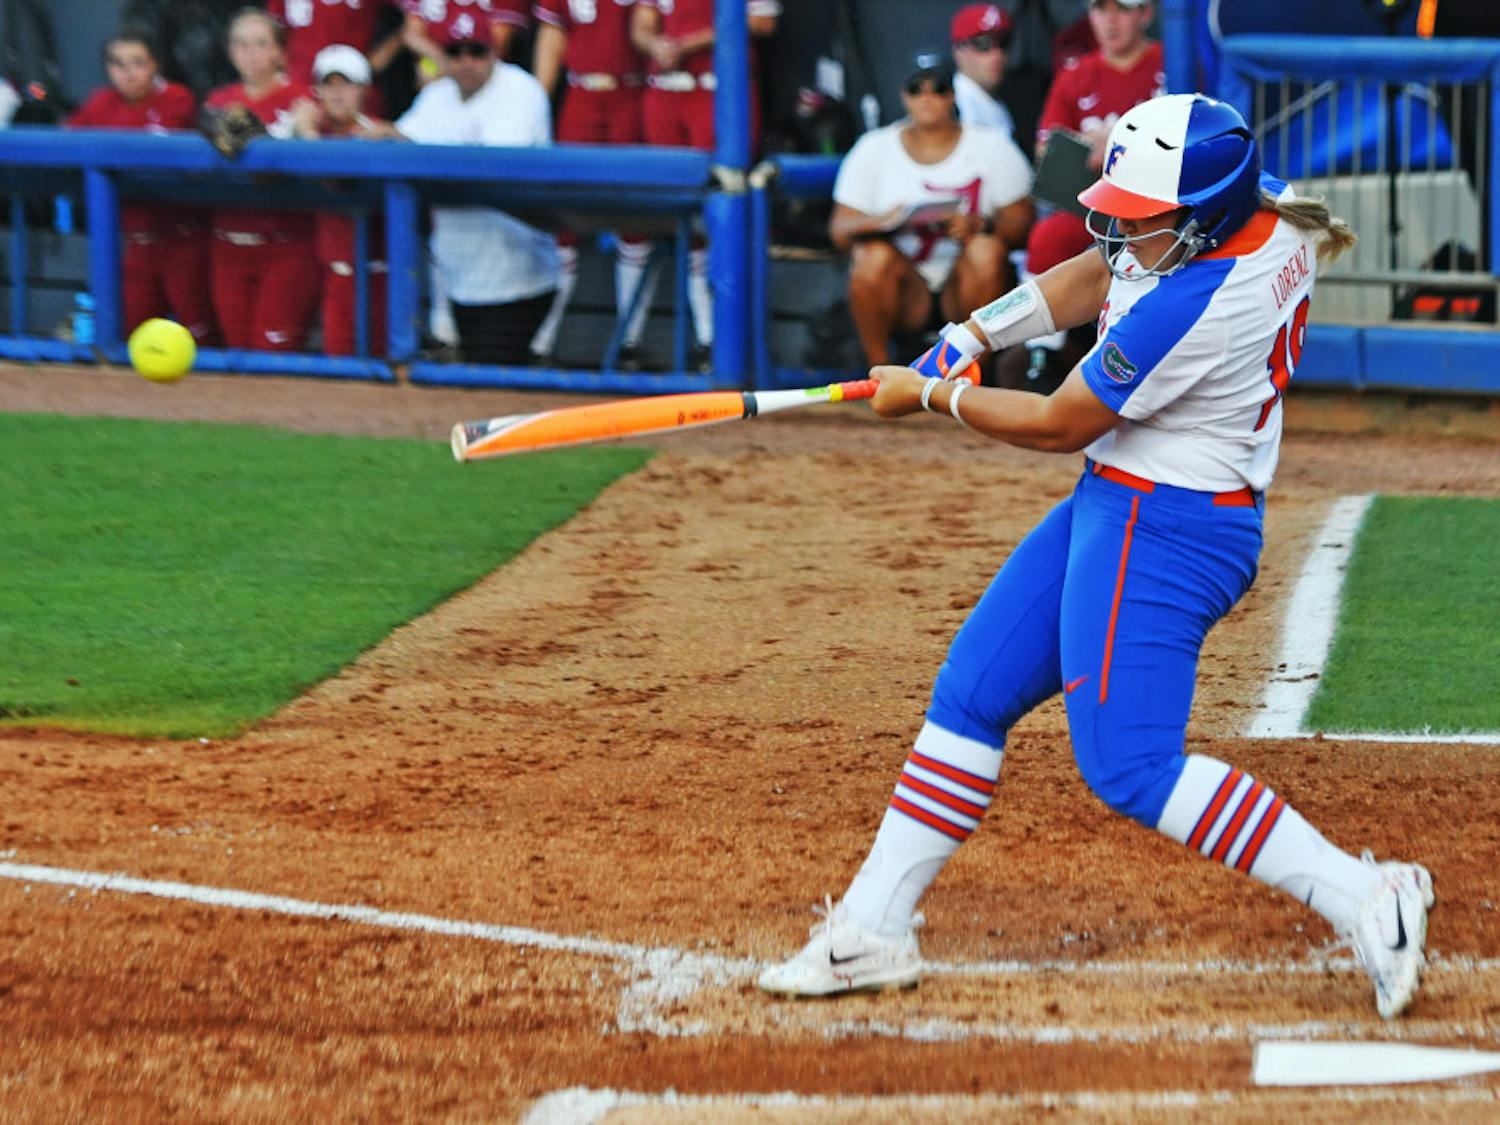 Left fielder Amanda Lorenz went 2-for-5 from the plate with a grand slam in Florida's doubleheader against Mississippi State on Saturday.